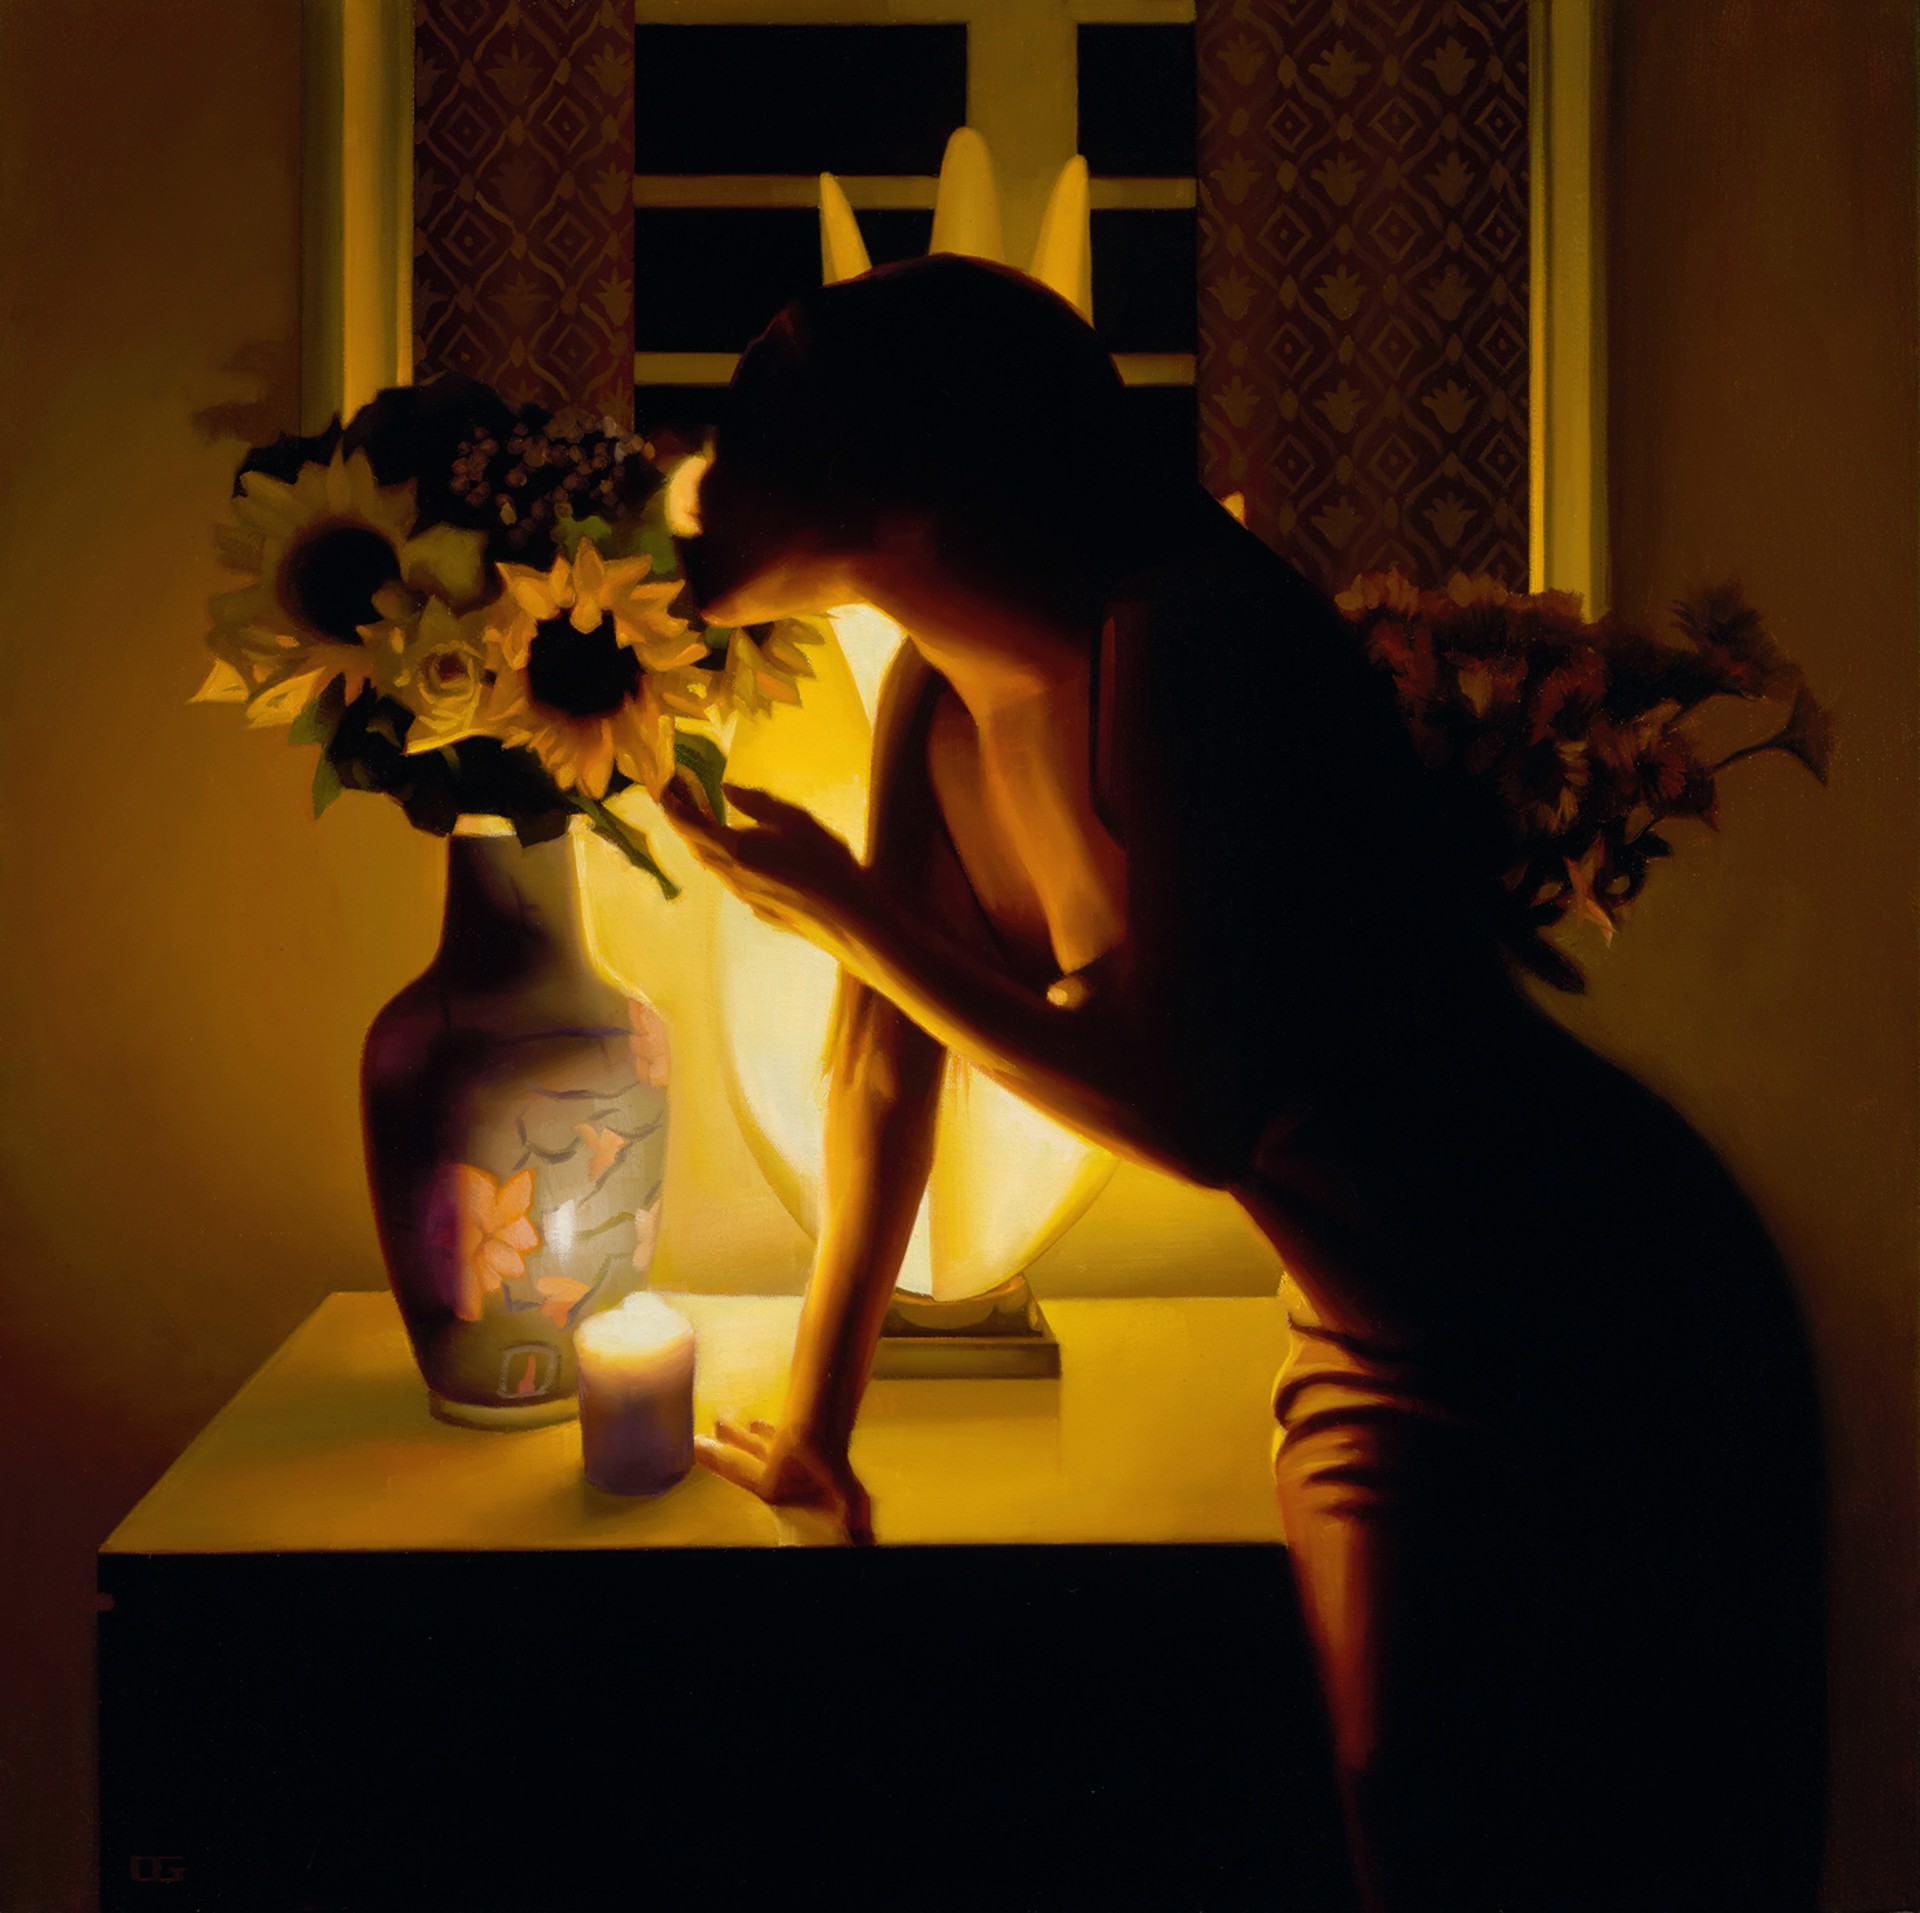 Flowers and Crowns by Carrie Graber